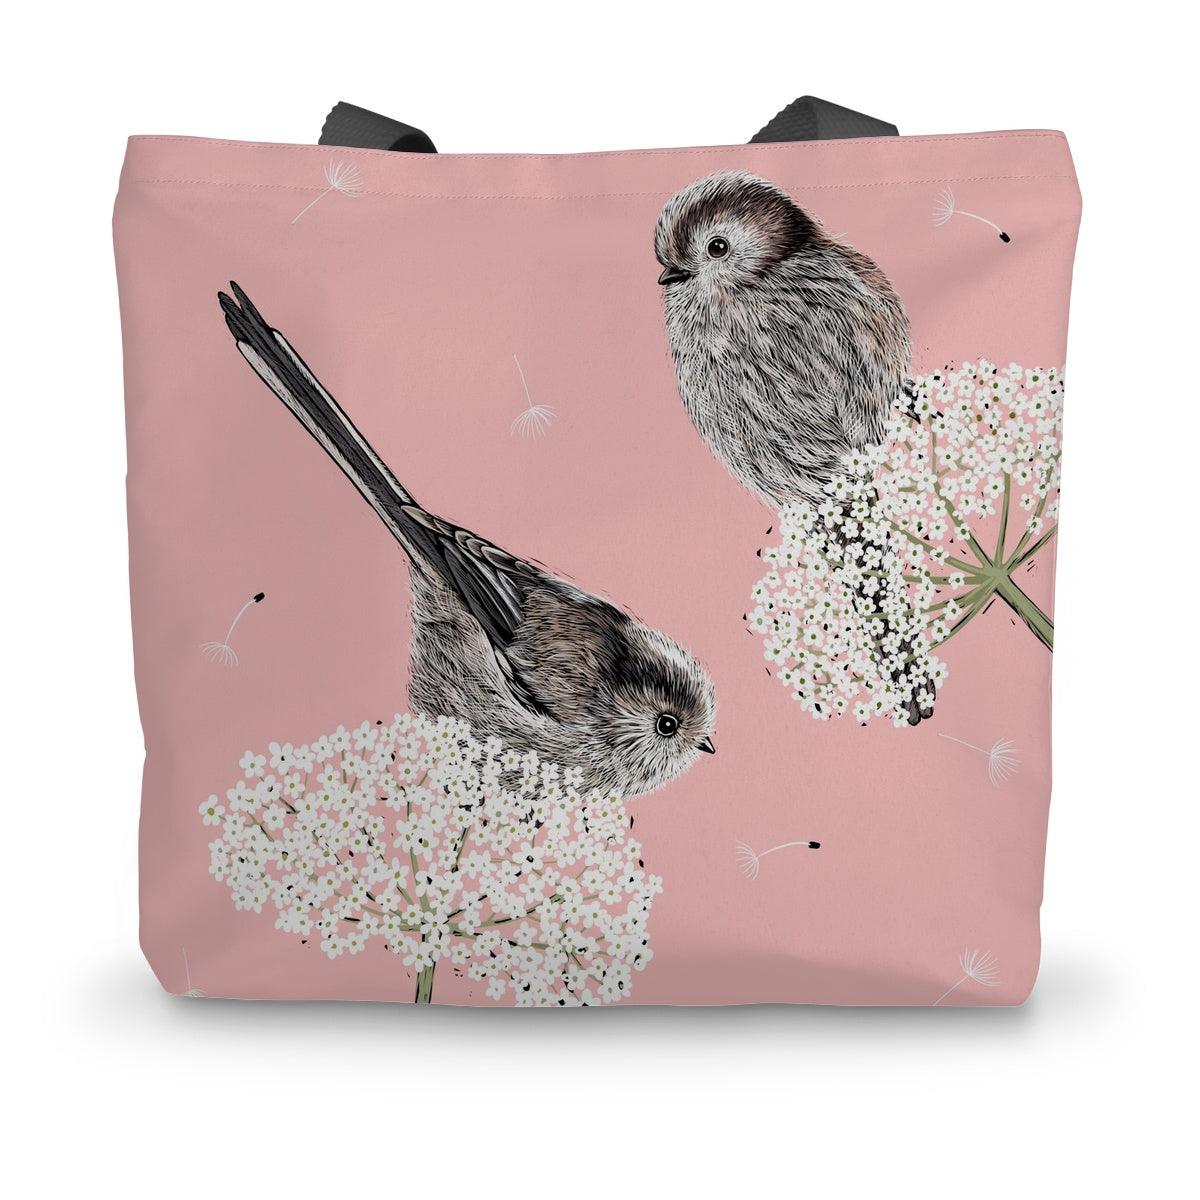 Long Tailed Tits tote bag, perched on cow parsley;  Illustrated design by Fox and Boo.